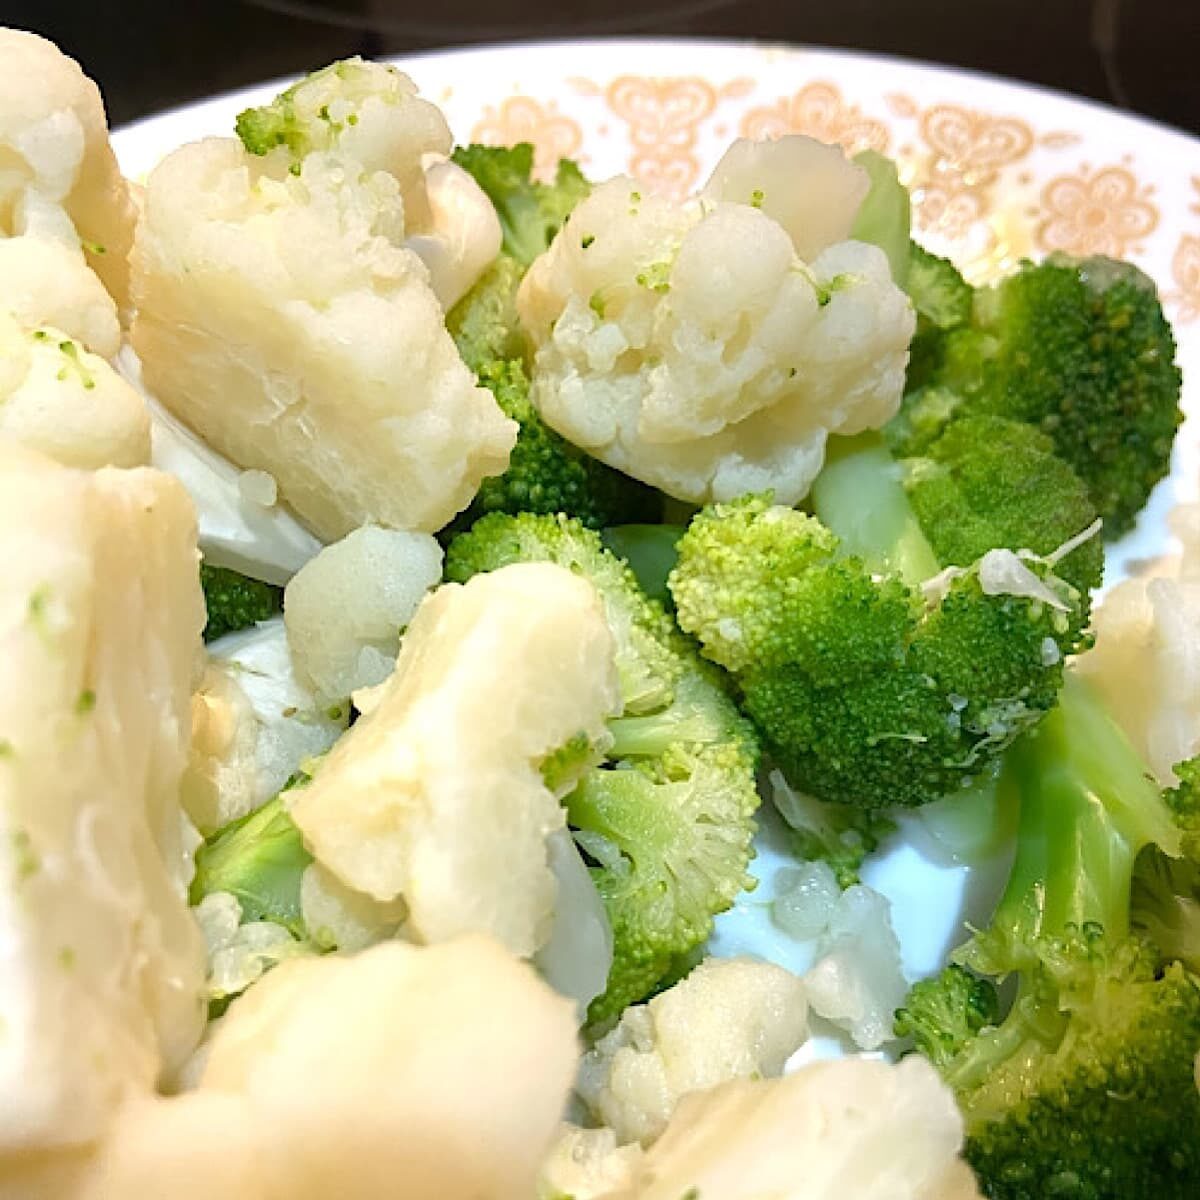 cooked broccoli and cauliflower